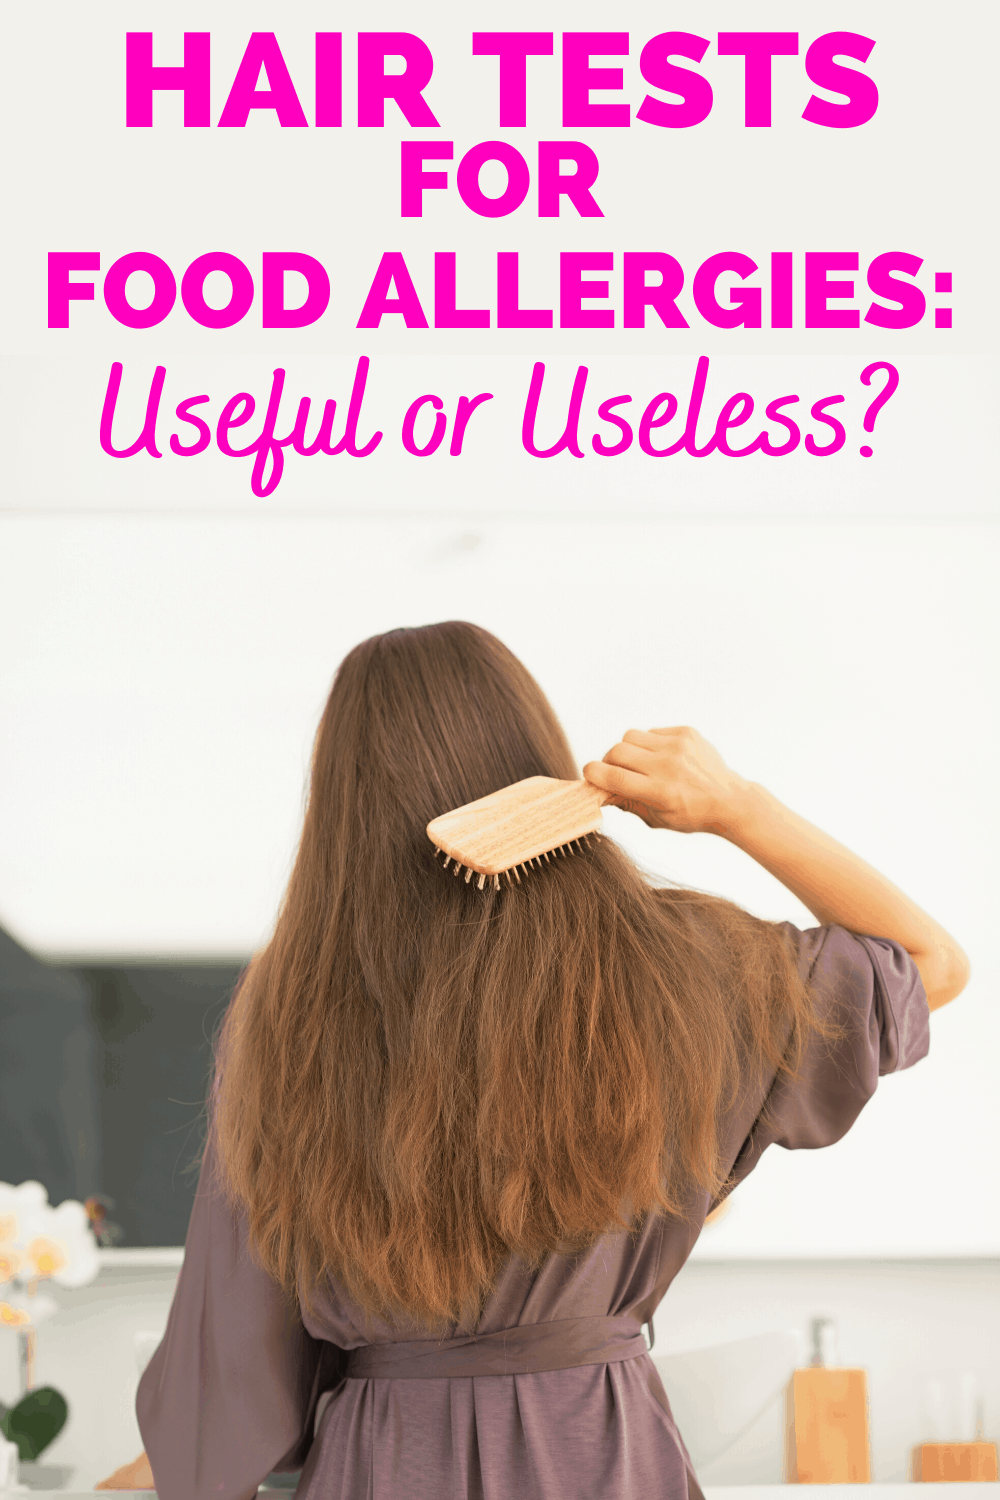 Hair Allergy Tests: Are They Legit? (Spoiler: No)